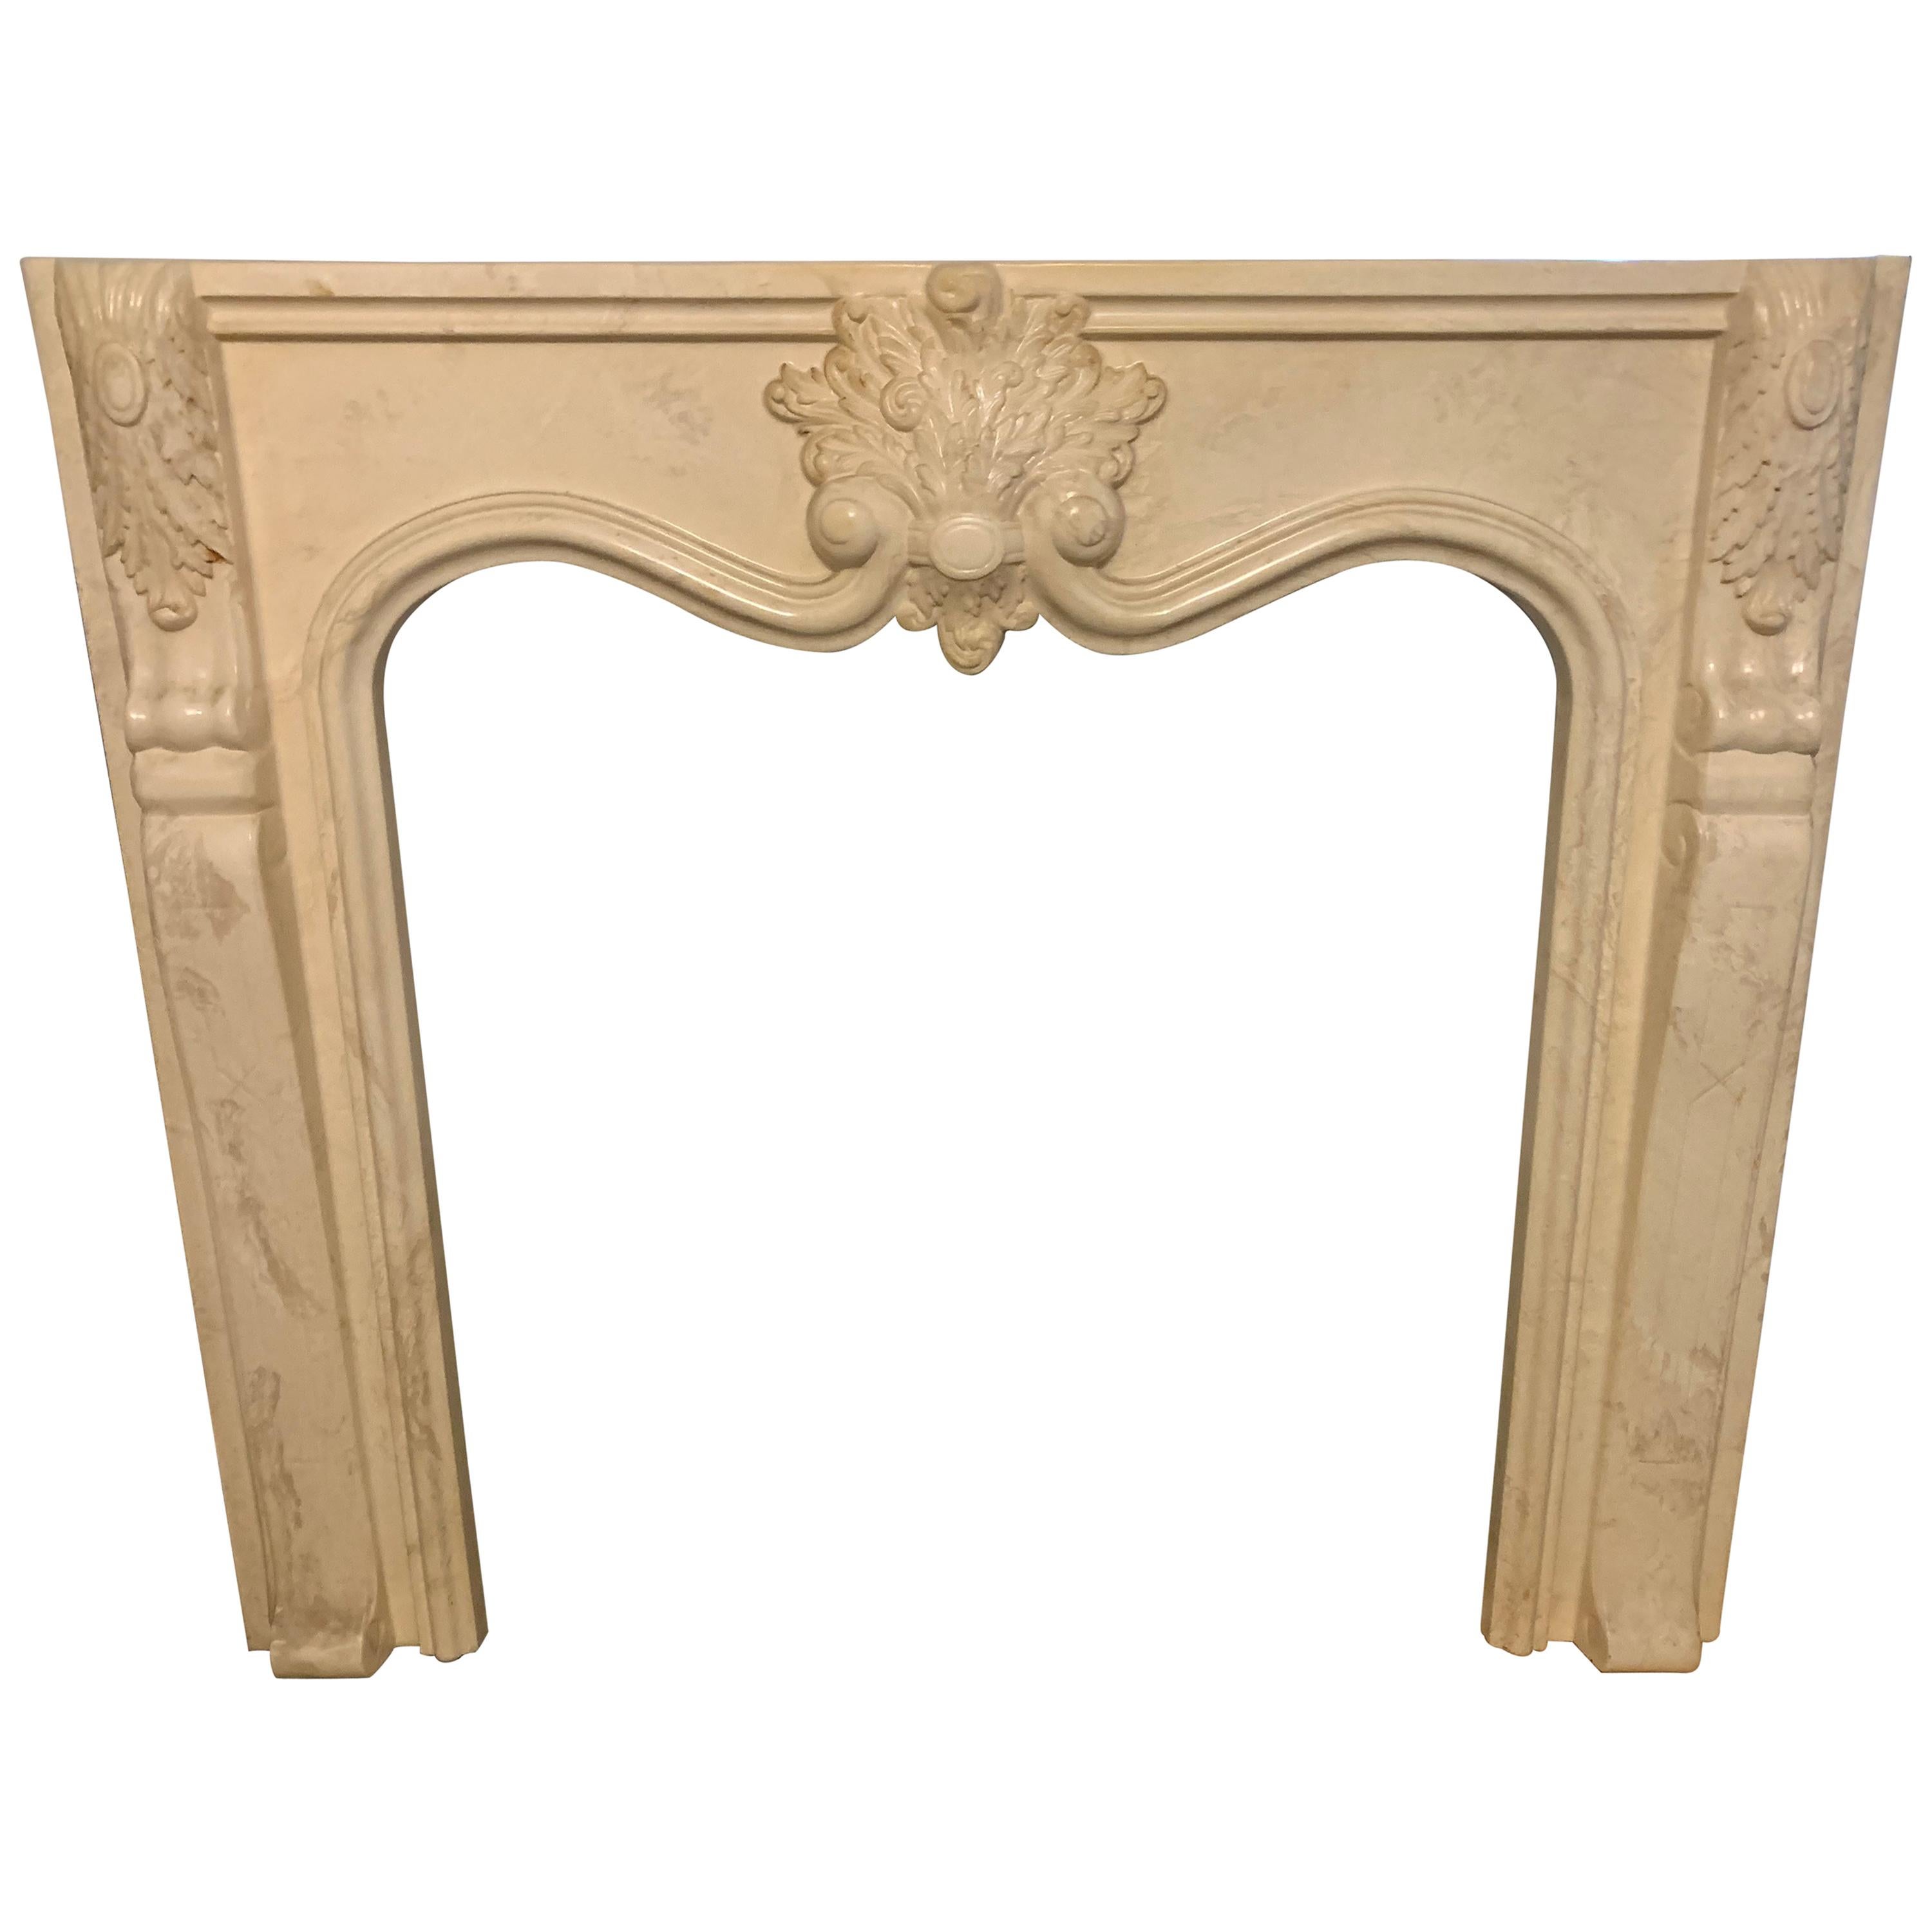 Antique French White Marble Arched Fireplace Surround and Mantel For Sale